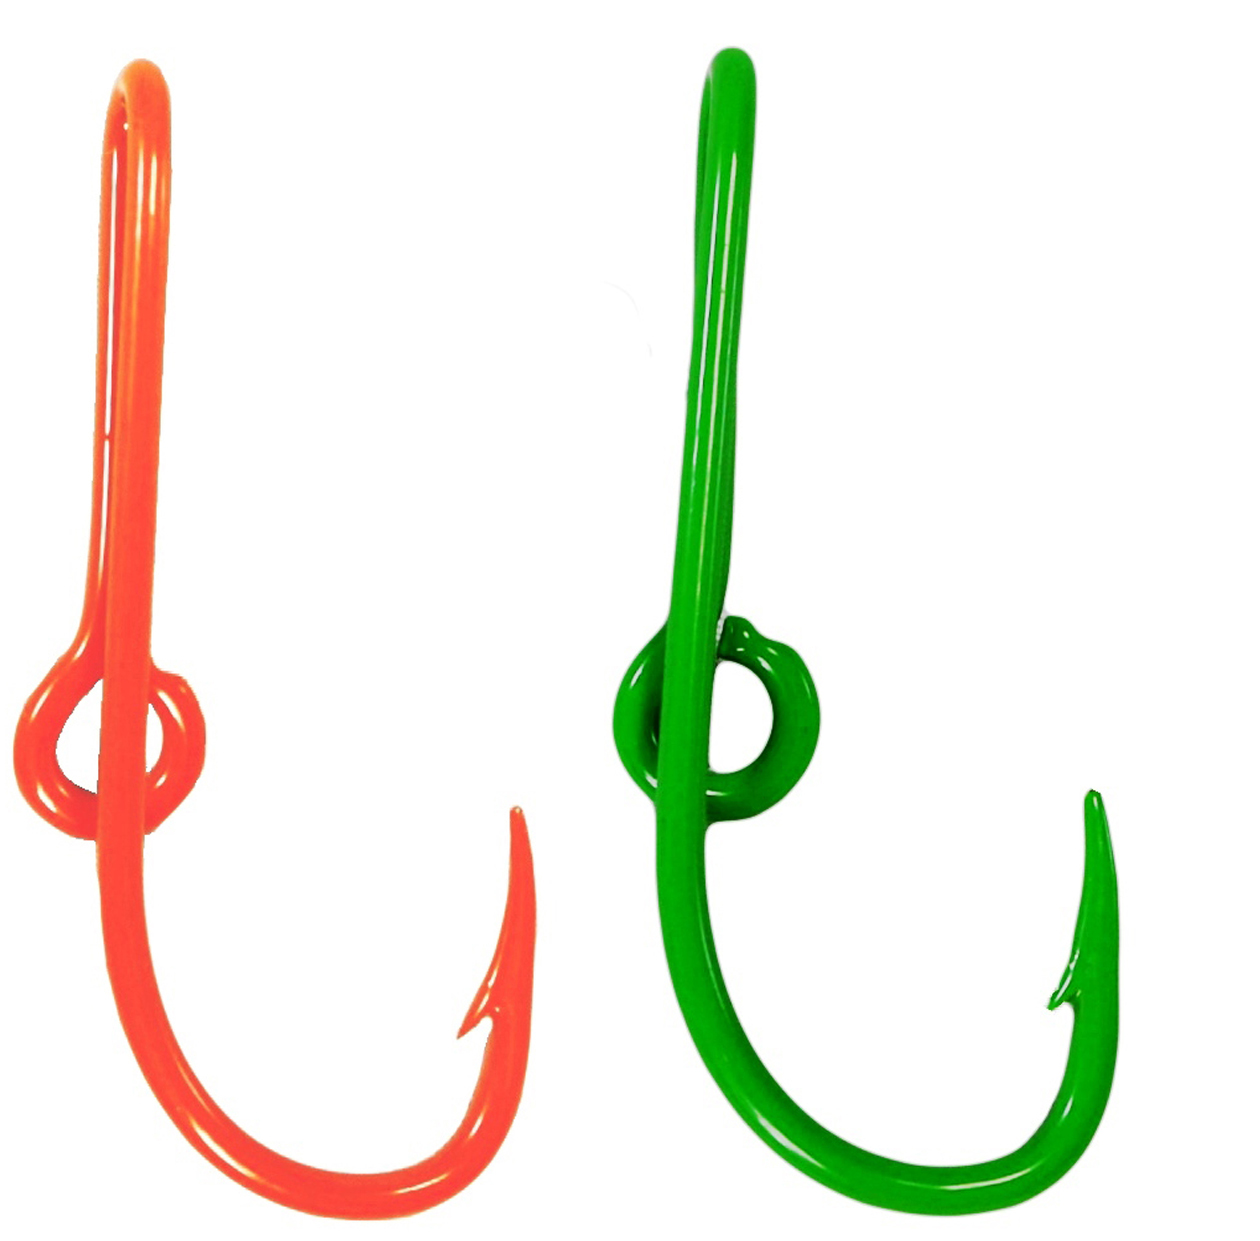 Custom Colored Eagle Claw Hat Fish Hooks for Cap -Set of Two Hat pins- One Bright Orange and One Lime Green Hat Hook Money/Tie Clasp - image 2 of 3